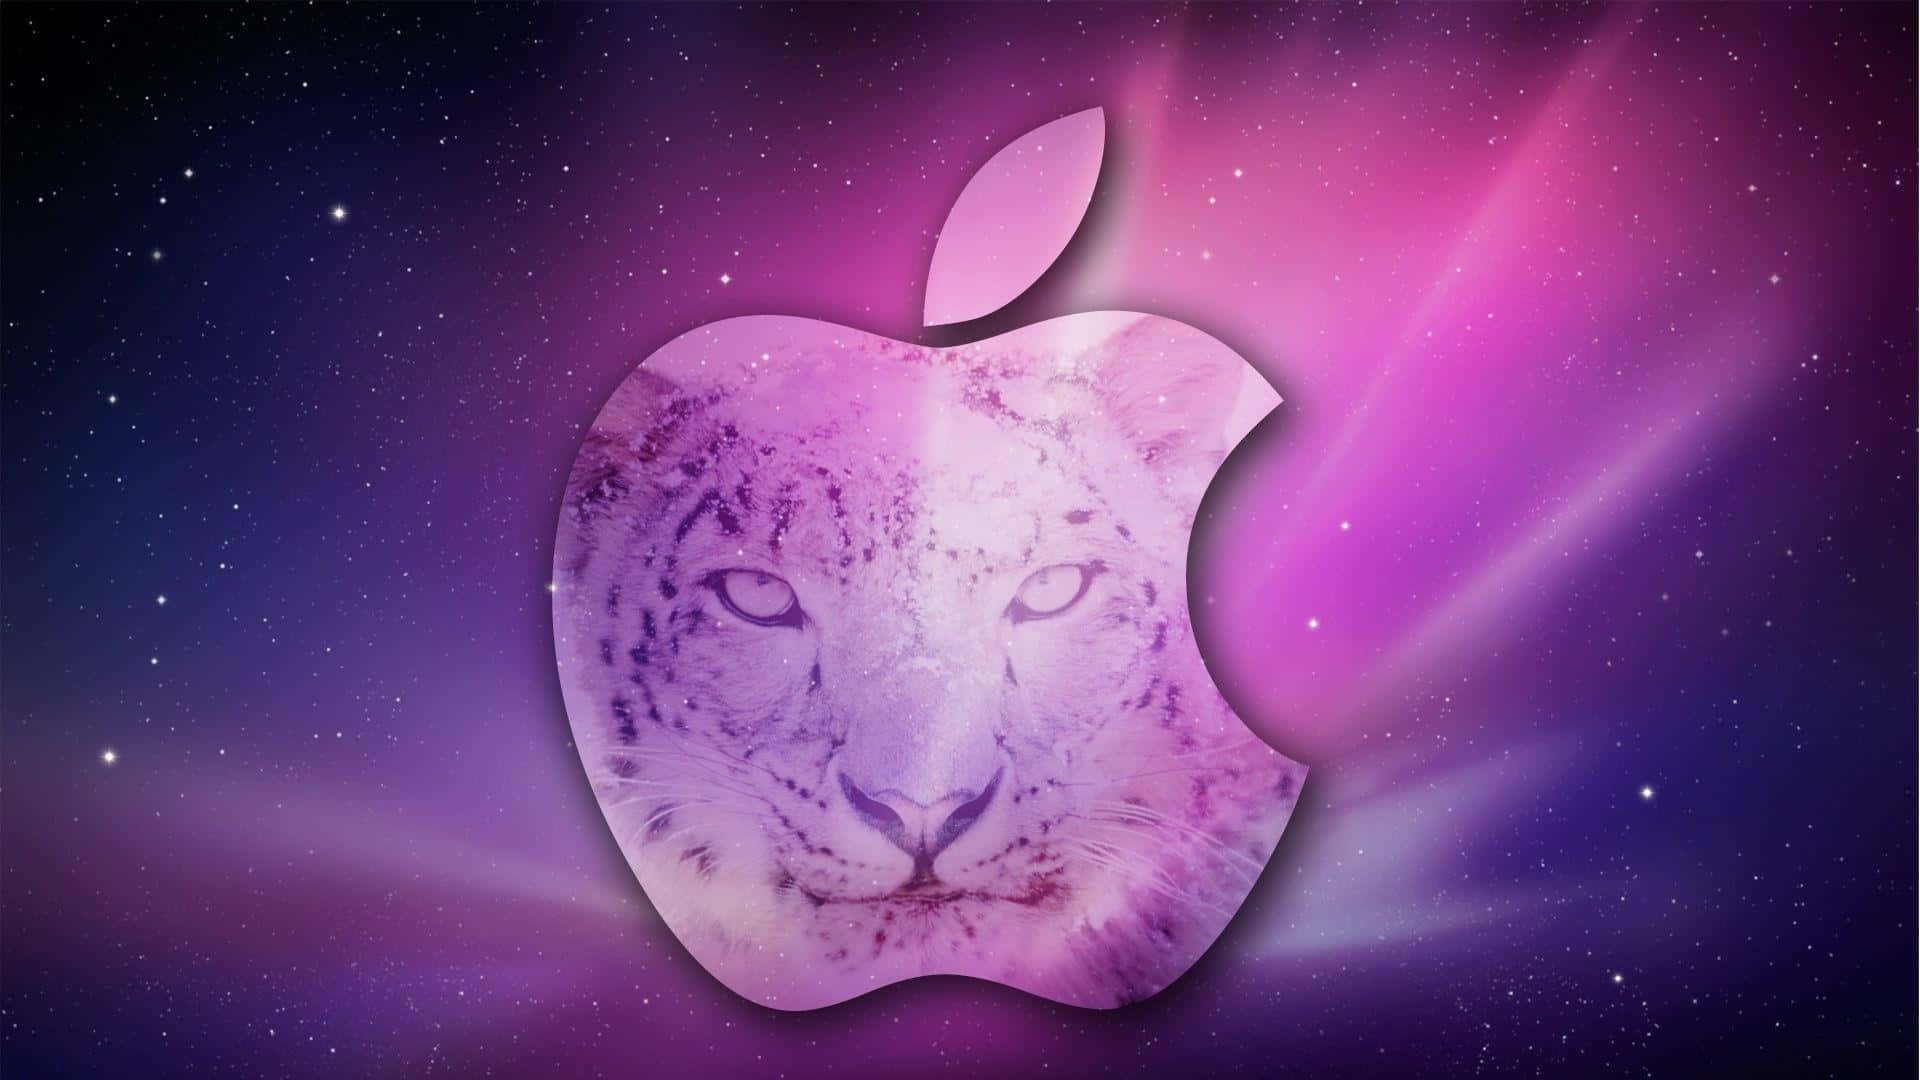 Refresh yourself with a cool apple Wallpaper